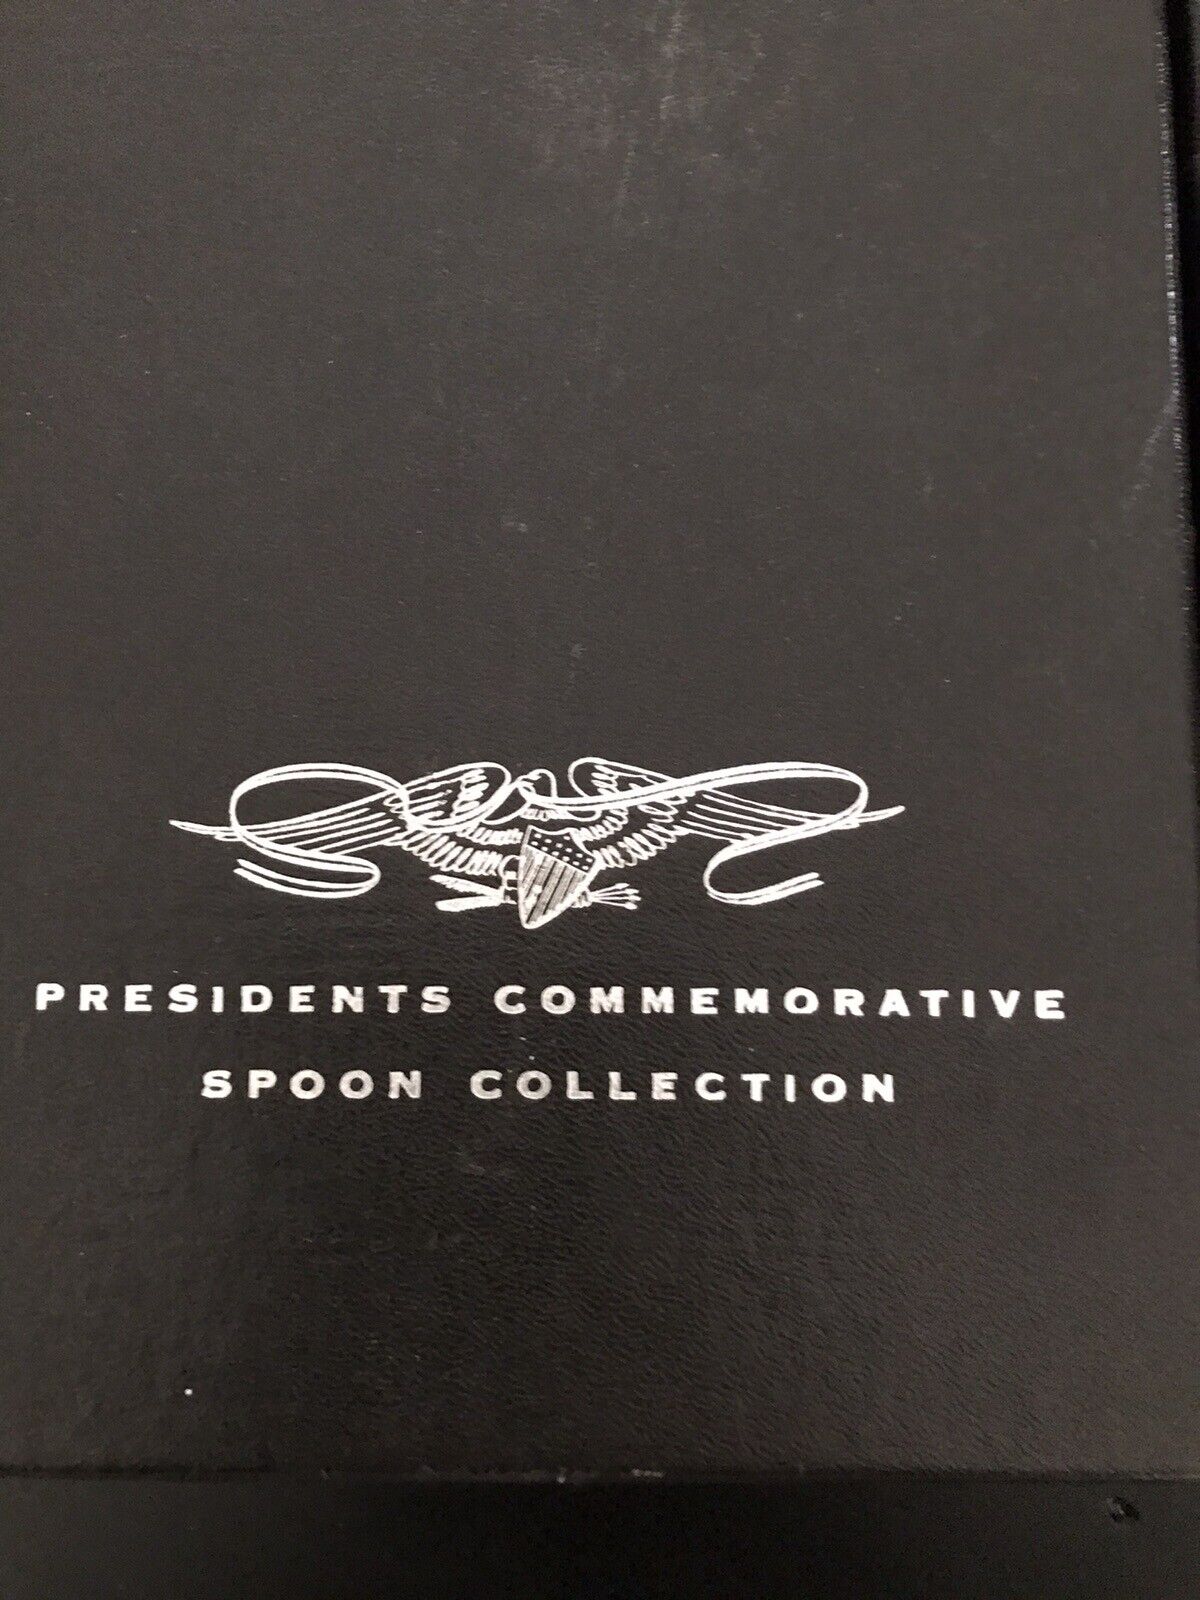  President Commemorative Spoon Collection in Case - 36 Spoons, Wm. Rogers 